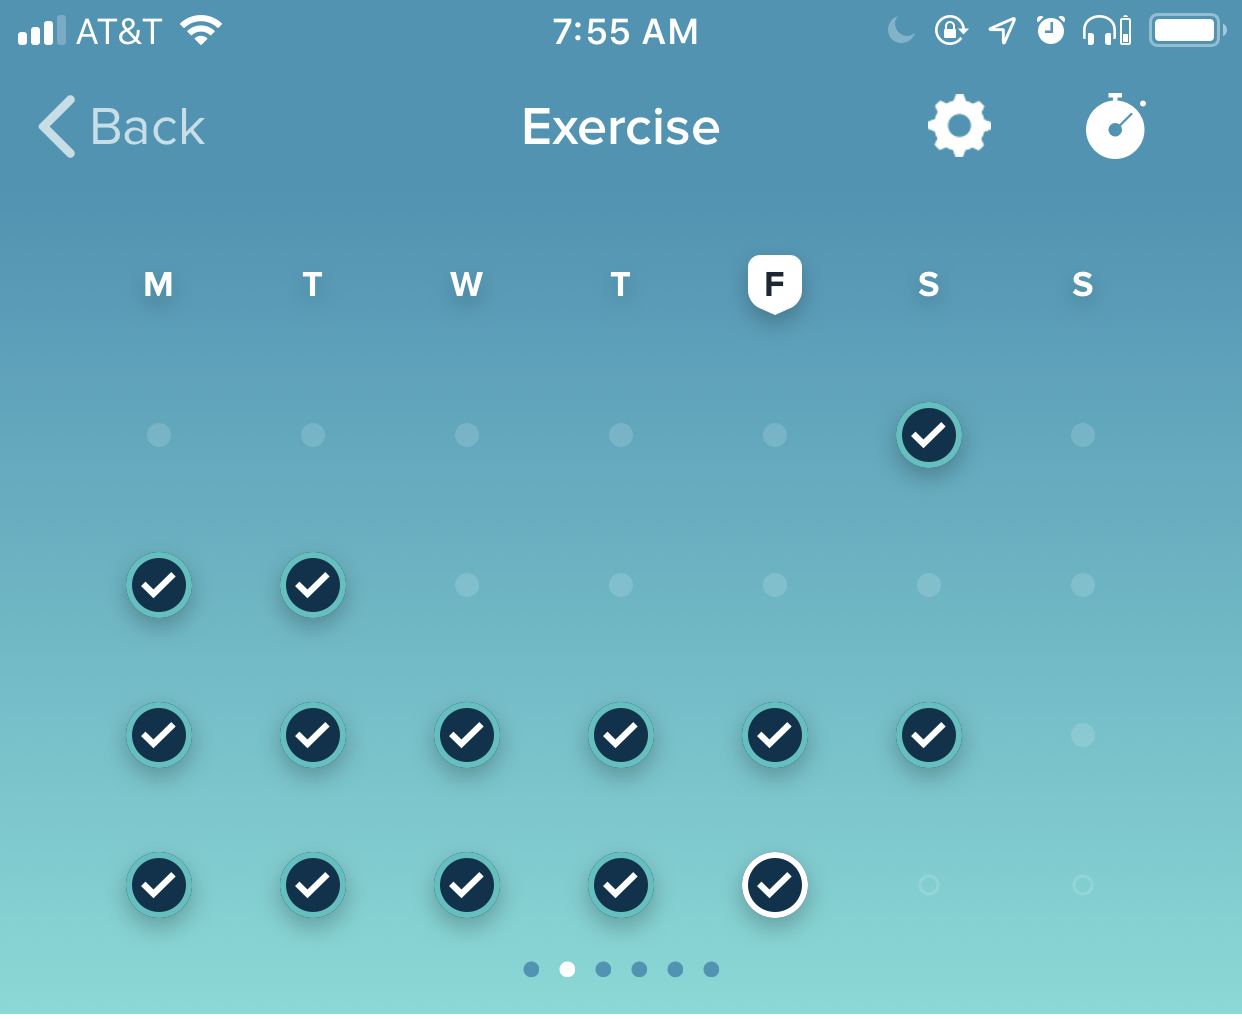 Two weeks of exercise Fitbit screenshot